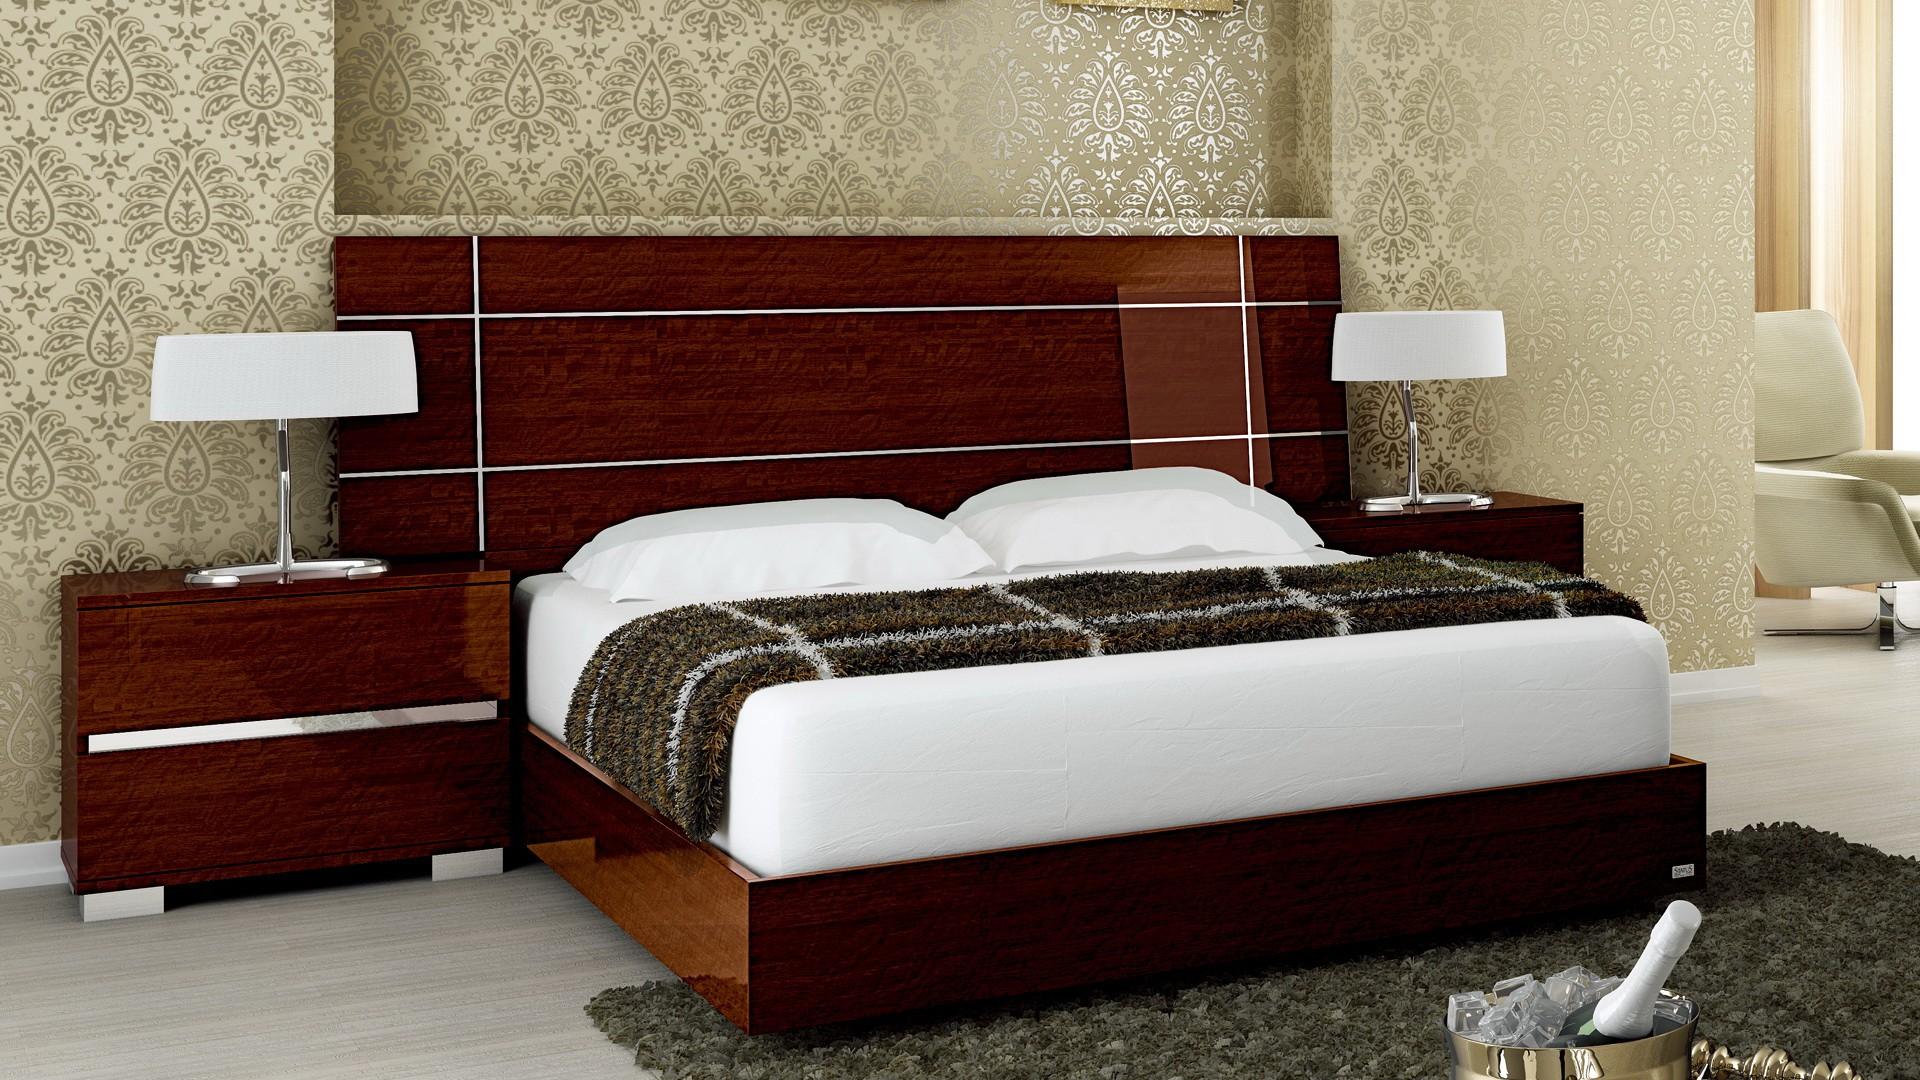 

    
At Home USA Dream Walnut High Gloss Lacquer King Bed Contemporary Made in Italy
